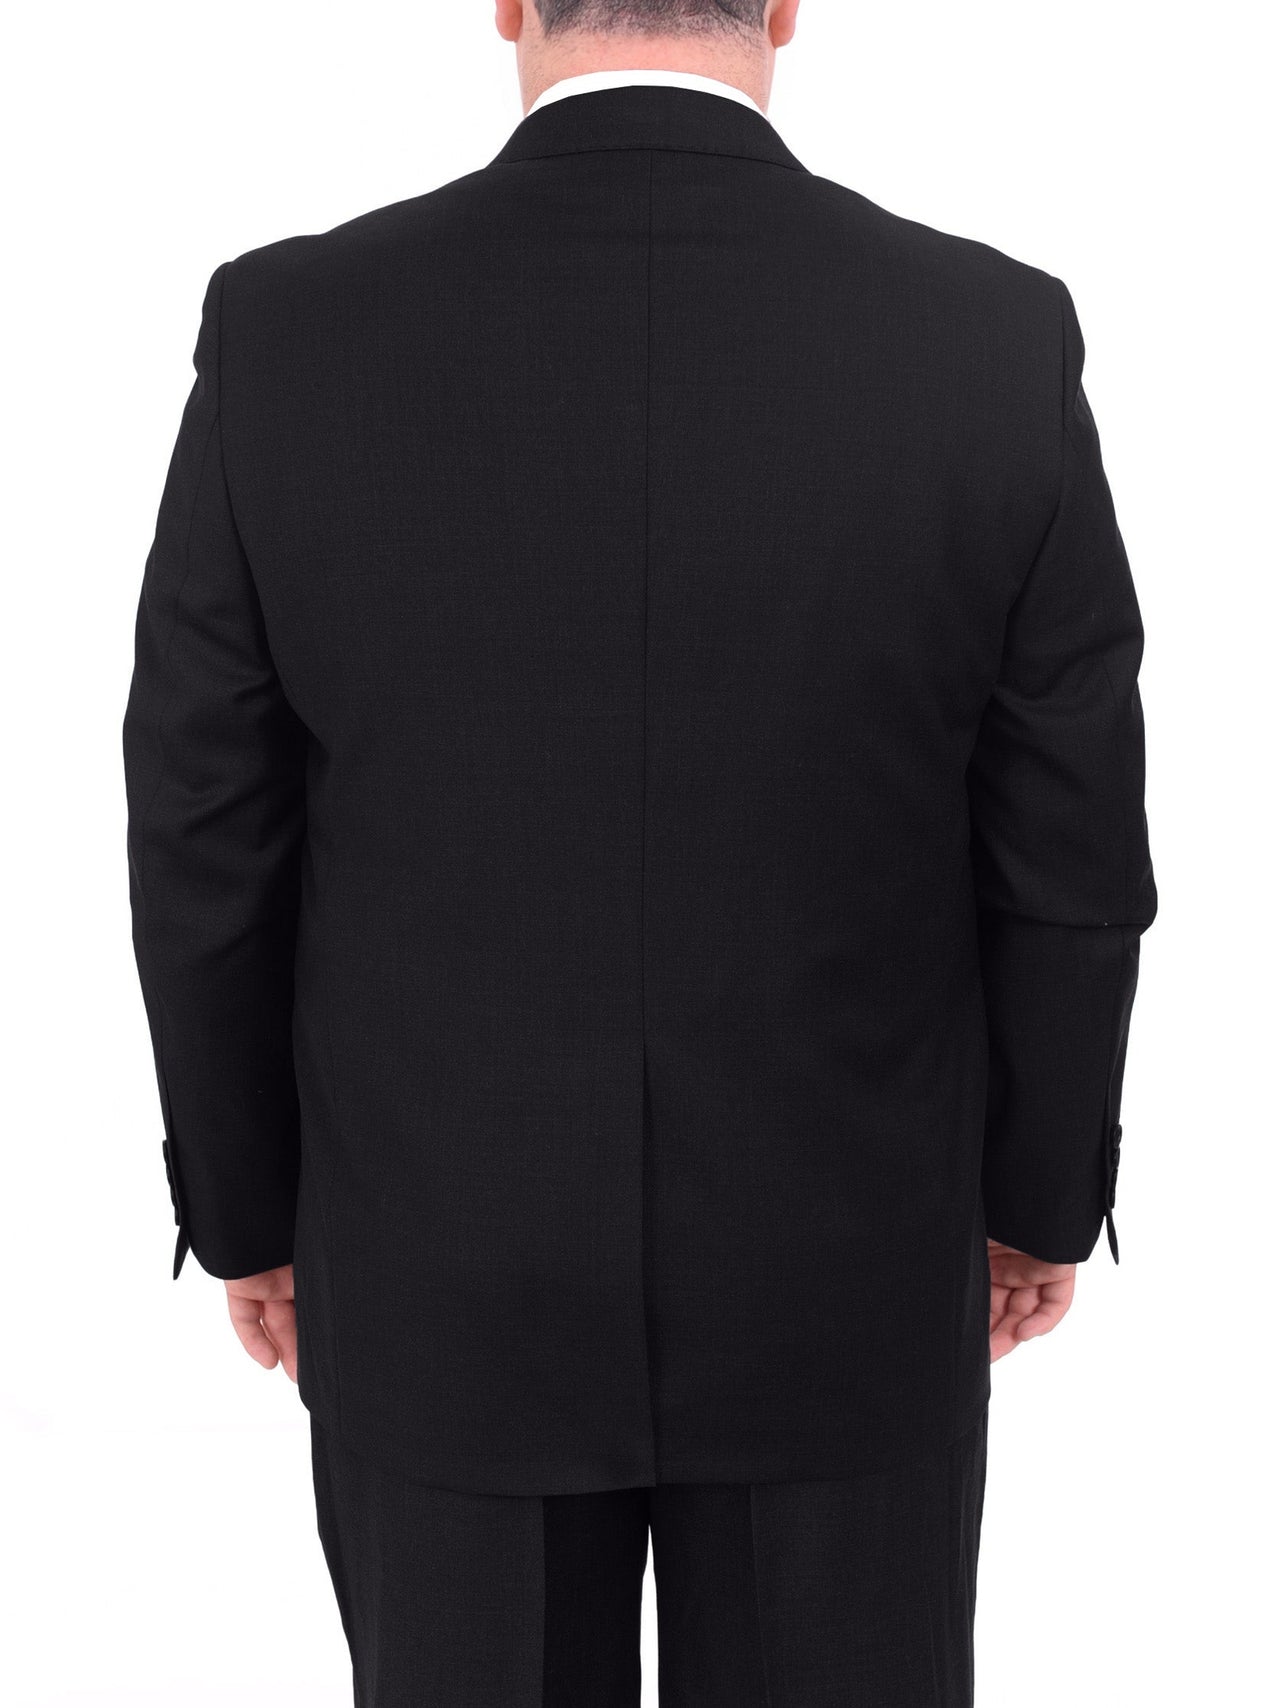 Men's Mazara Portly Fit Executive Cut Black Two Button Wool Suit